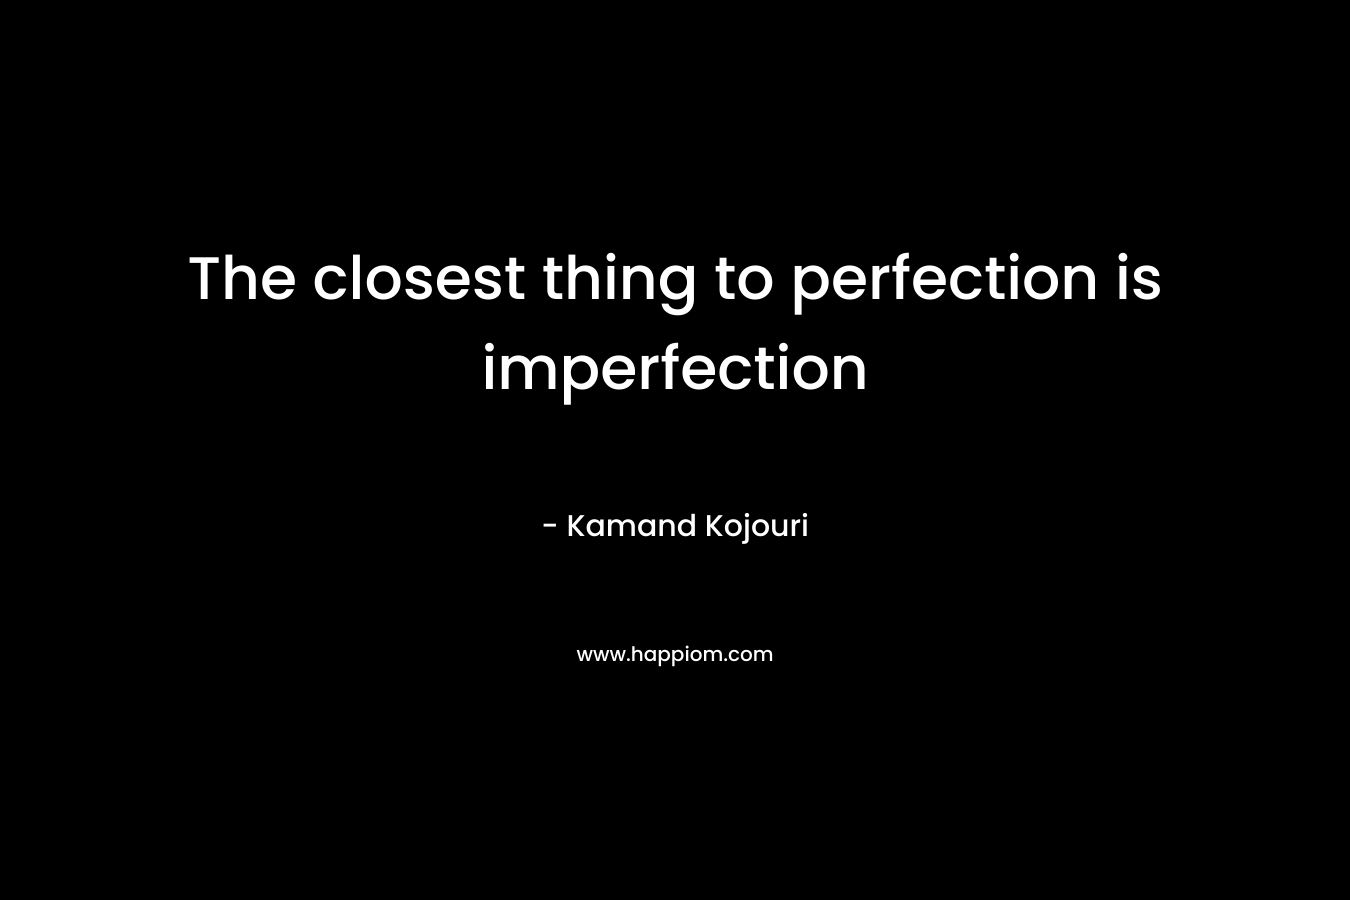 The closest thing to perfection is imperfection